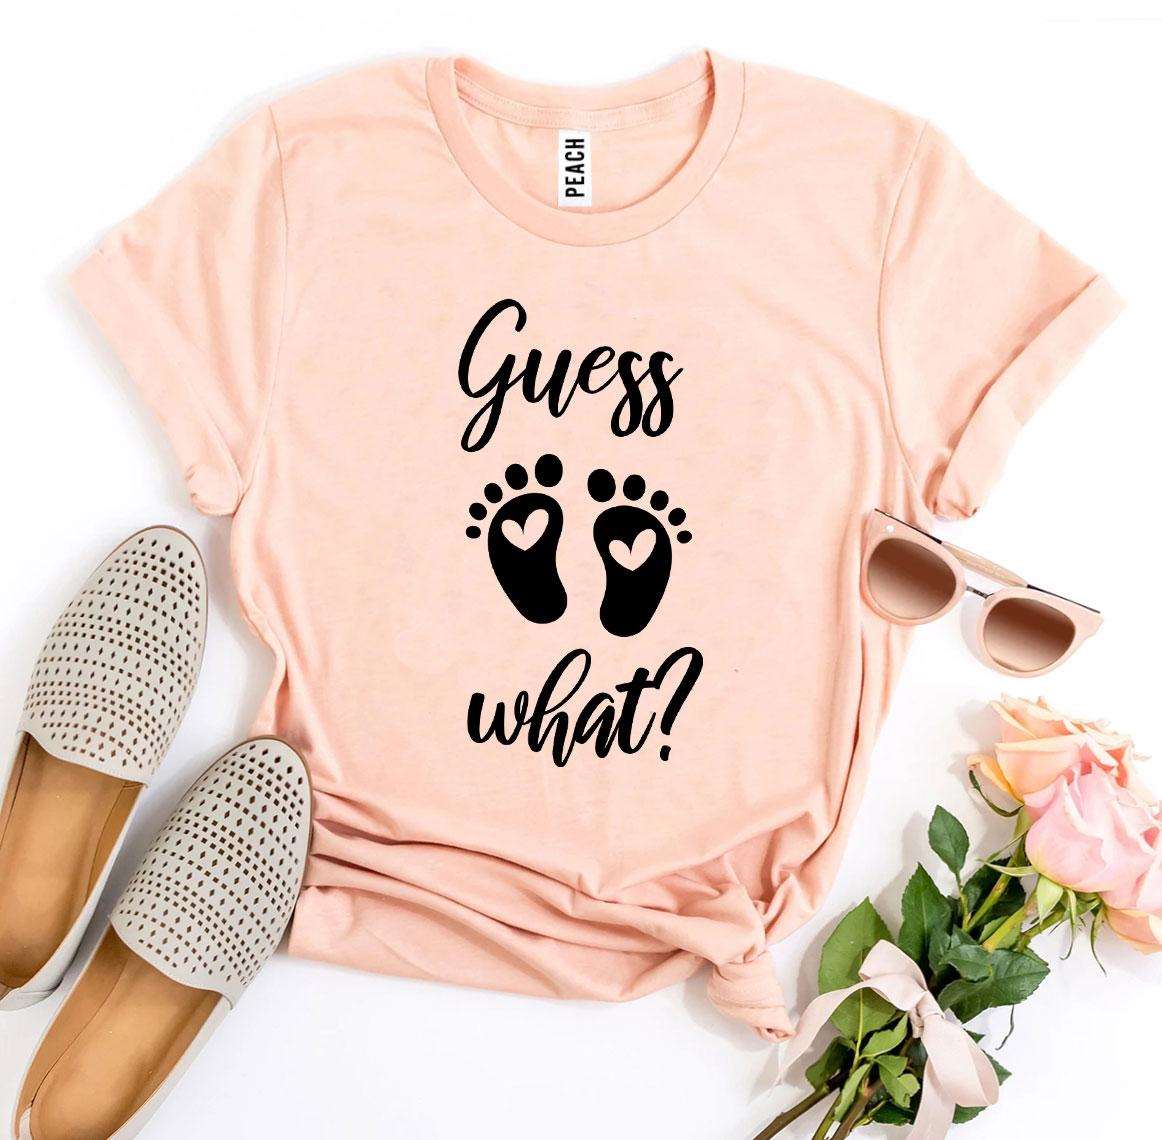 Nfin8 Teaser's Delight - 'Guess What?' Premium Quality T-shirt